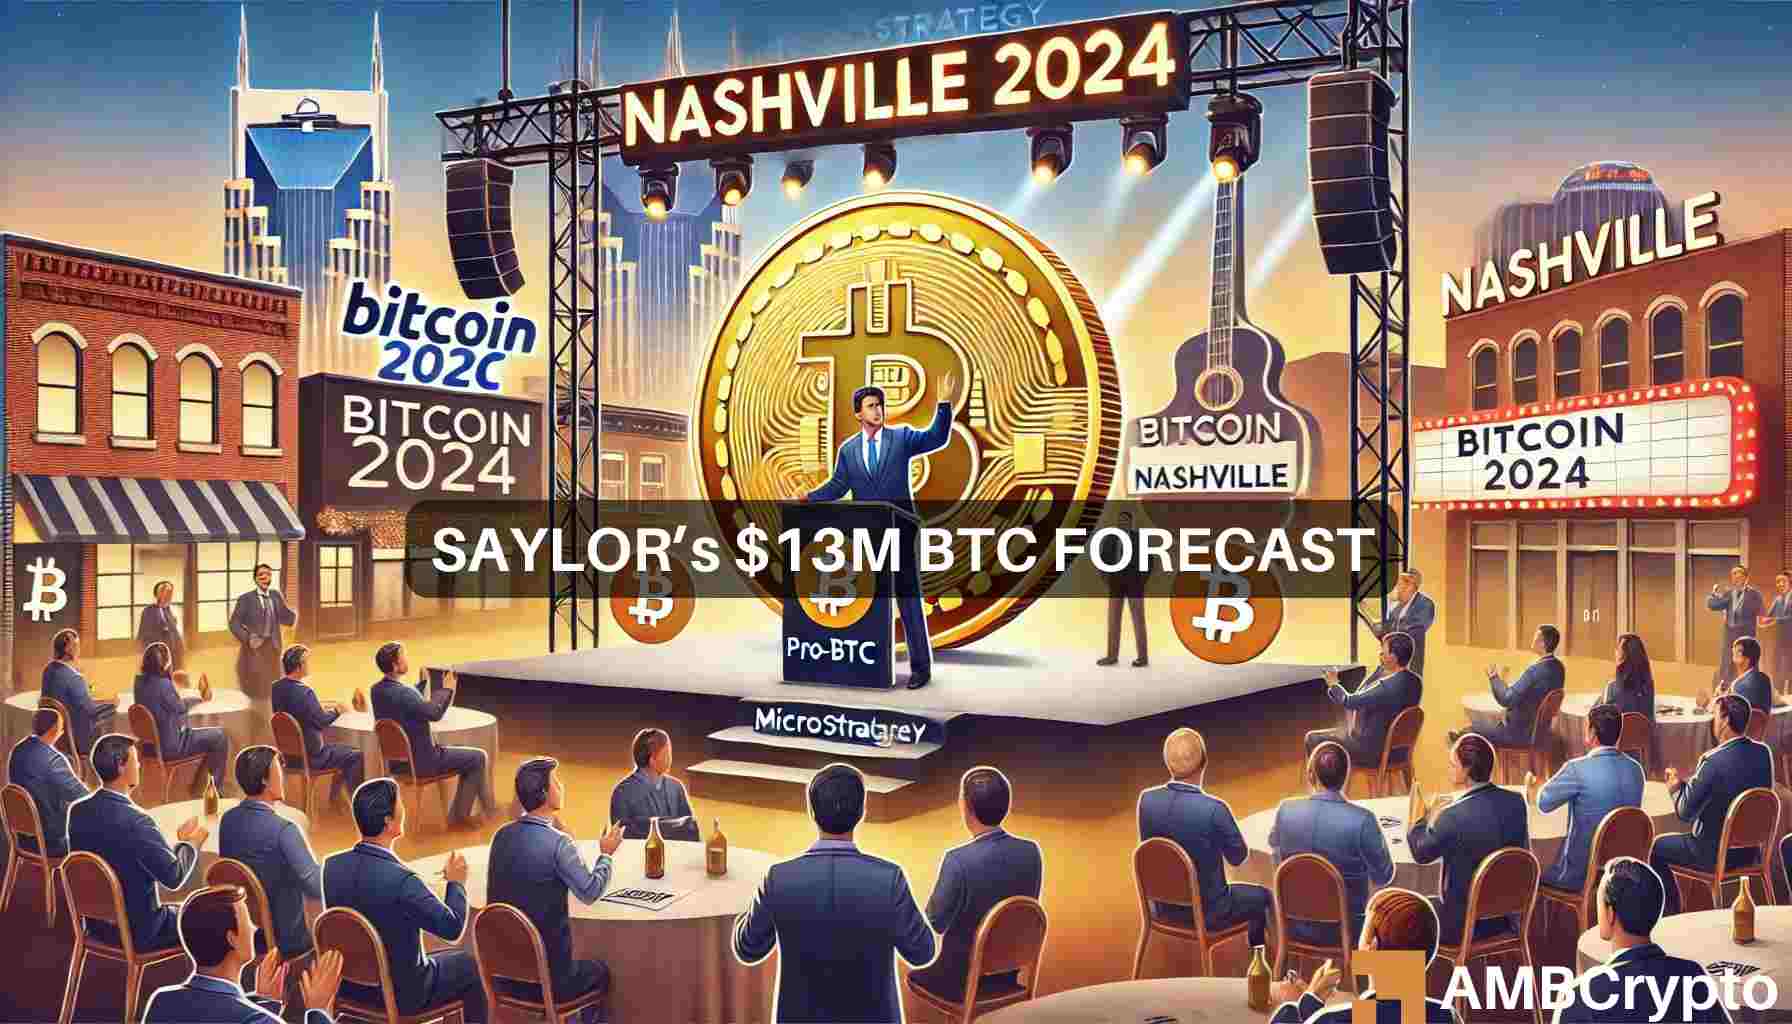 $3M or $49M - Michael Saylor's Bitcoin projections for 2045!